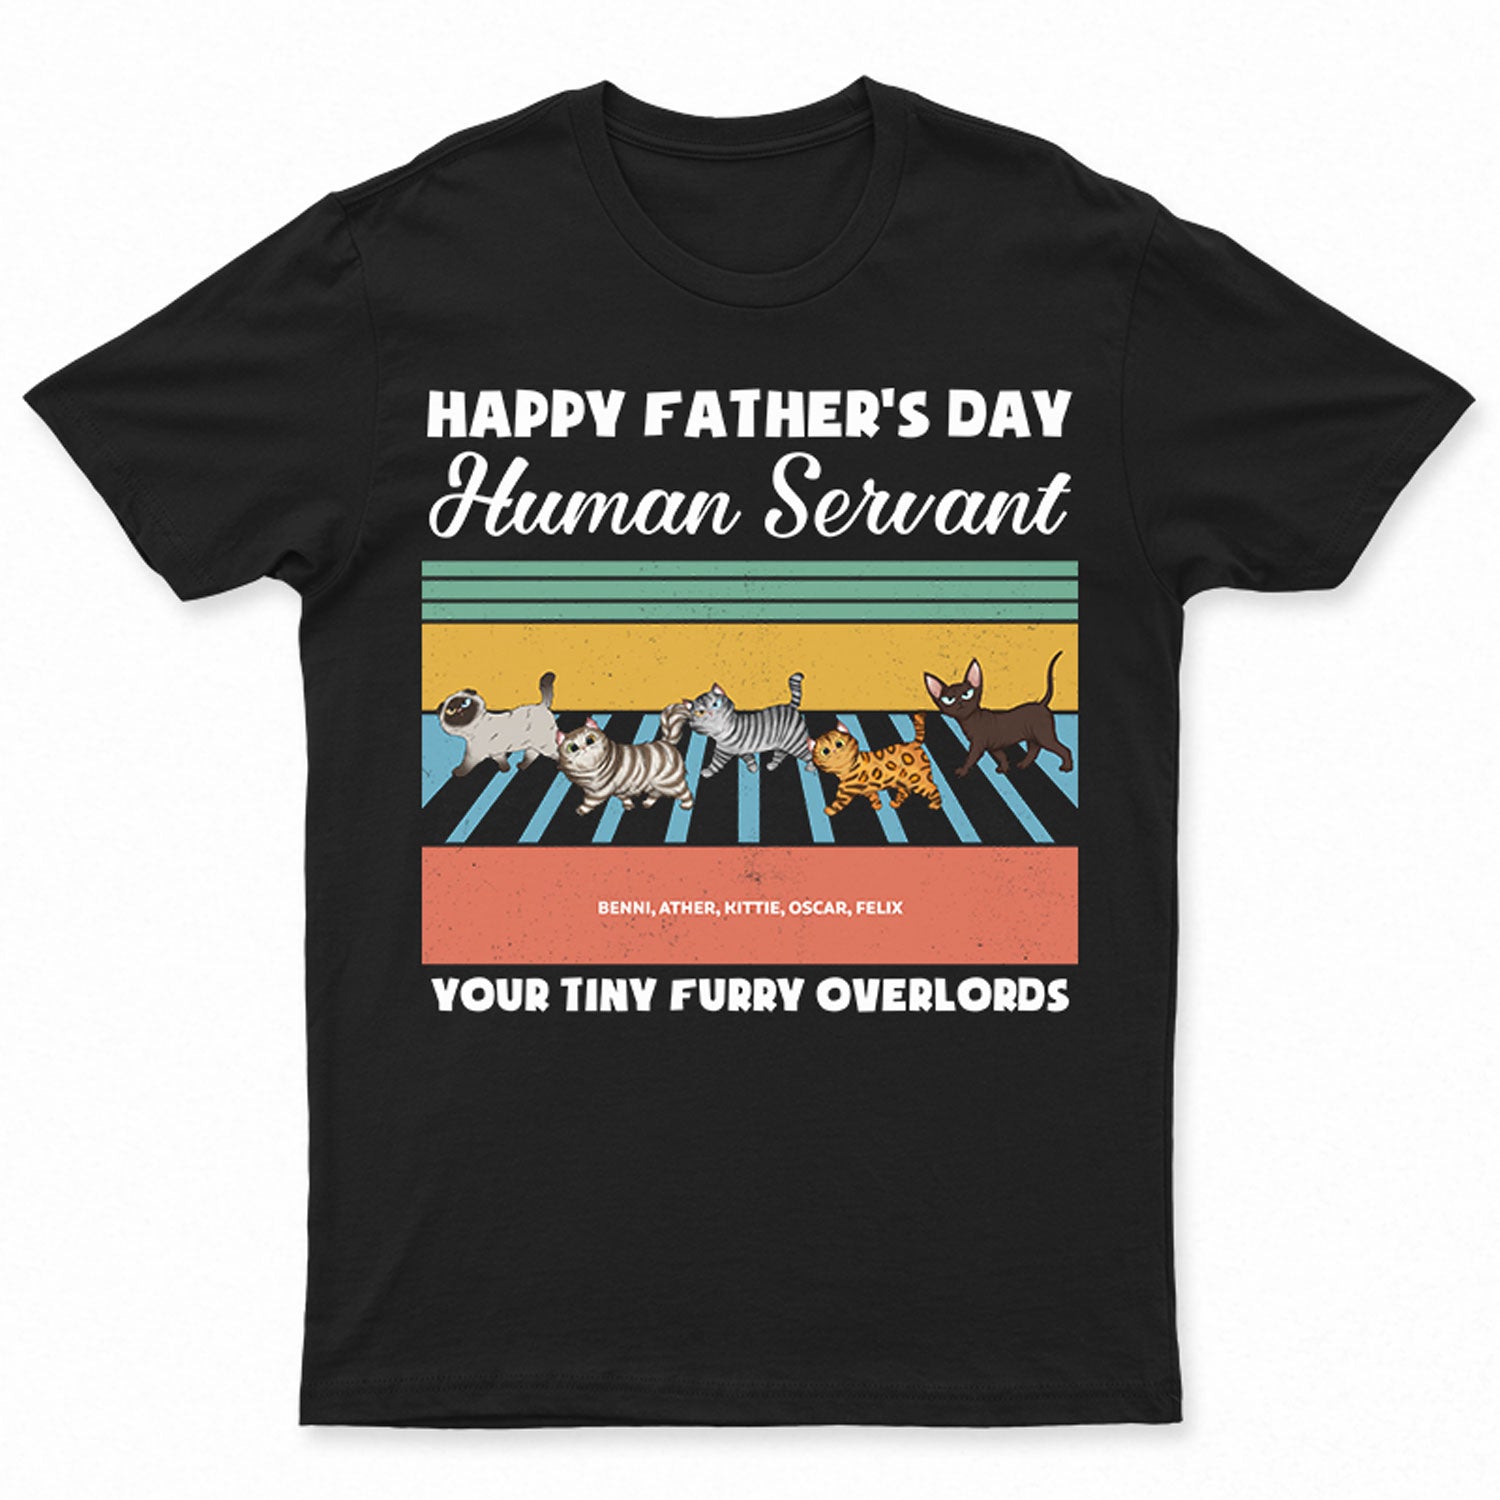 Good Morning Your Tiny Furry Overlords - Gift For Cat Dad, Cat Mom - Personalized Custom T Shirt